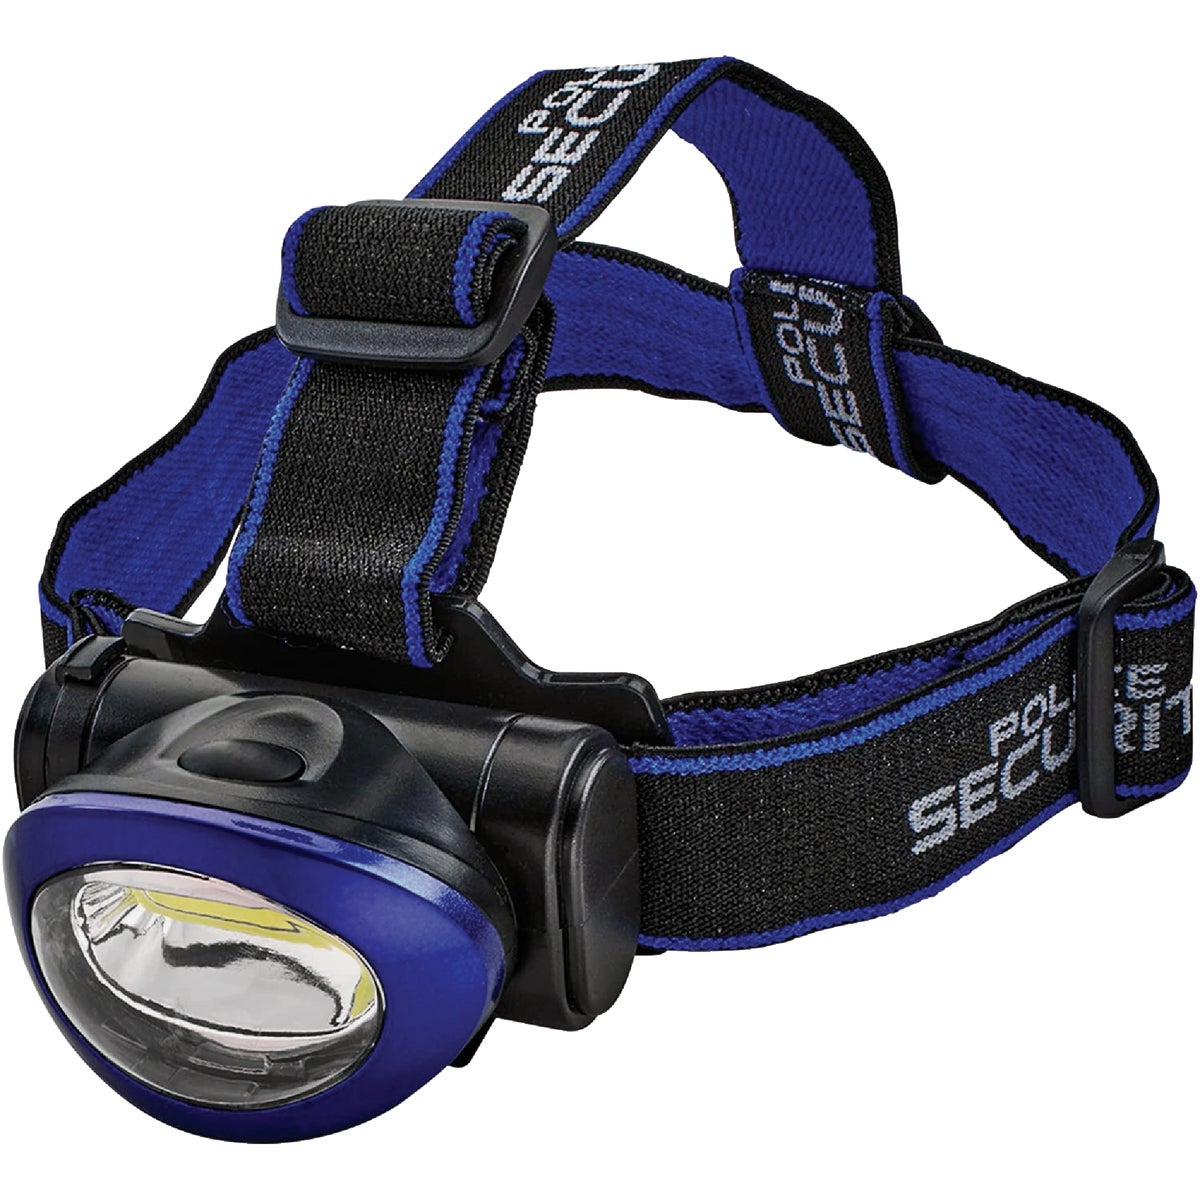 Police Security Connector 200 Lm. LED 3AAA Headlamp